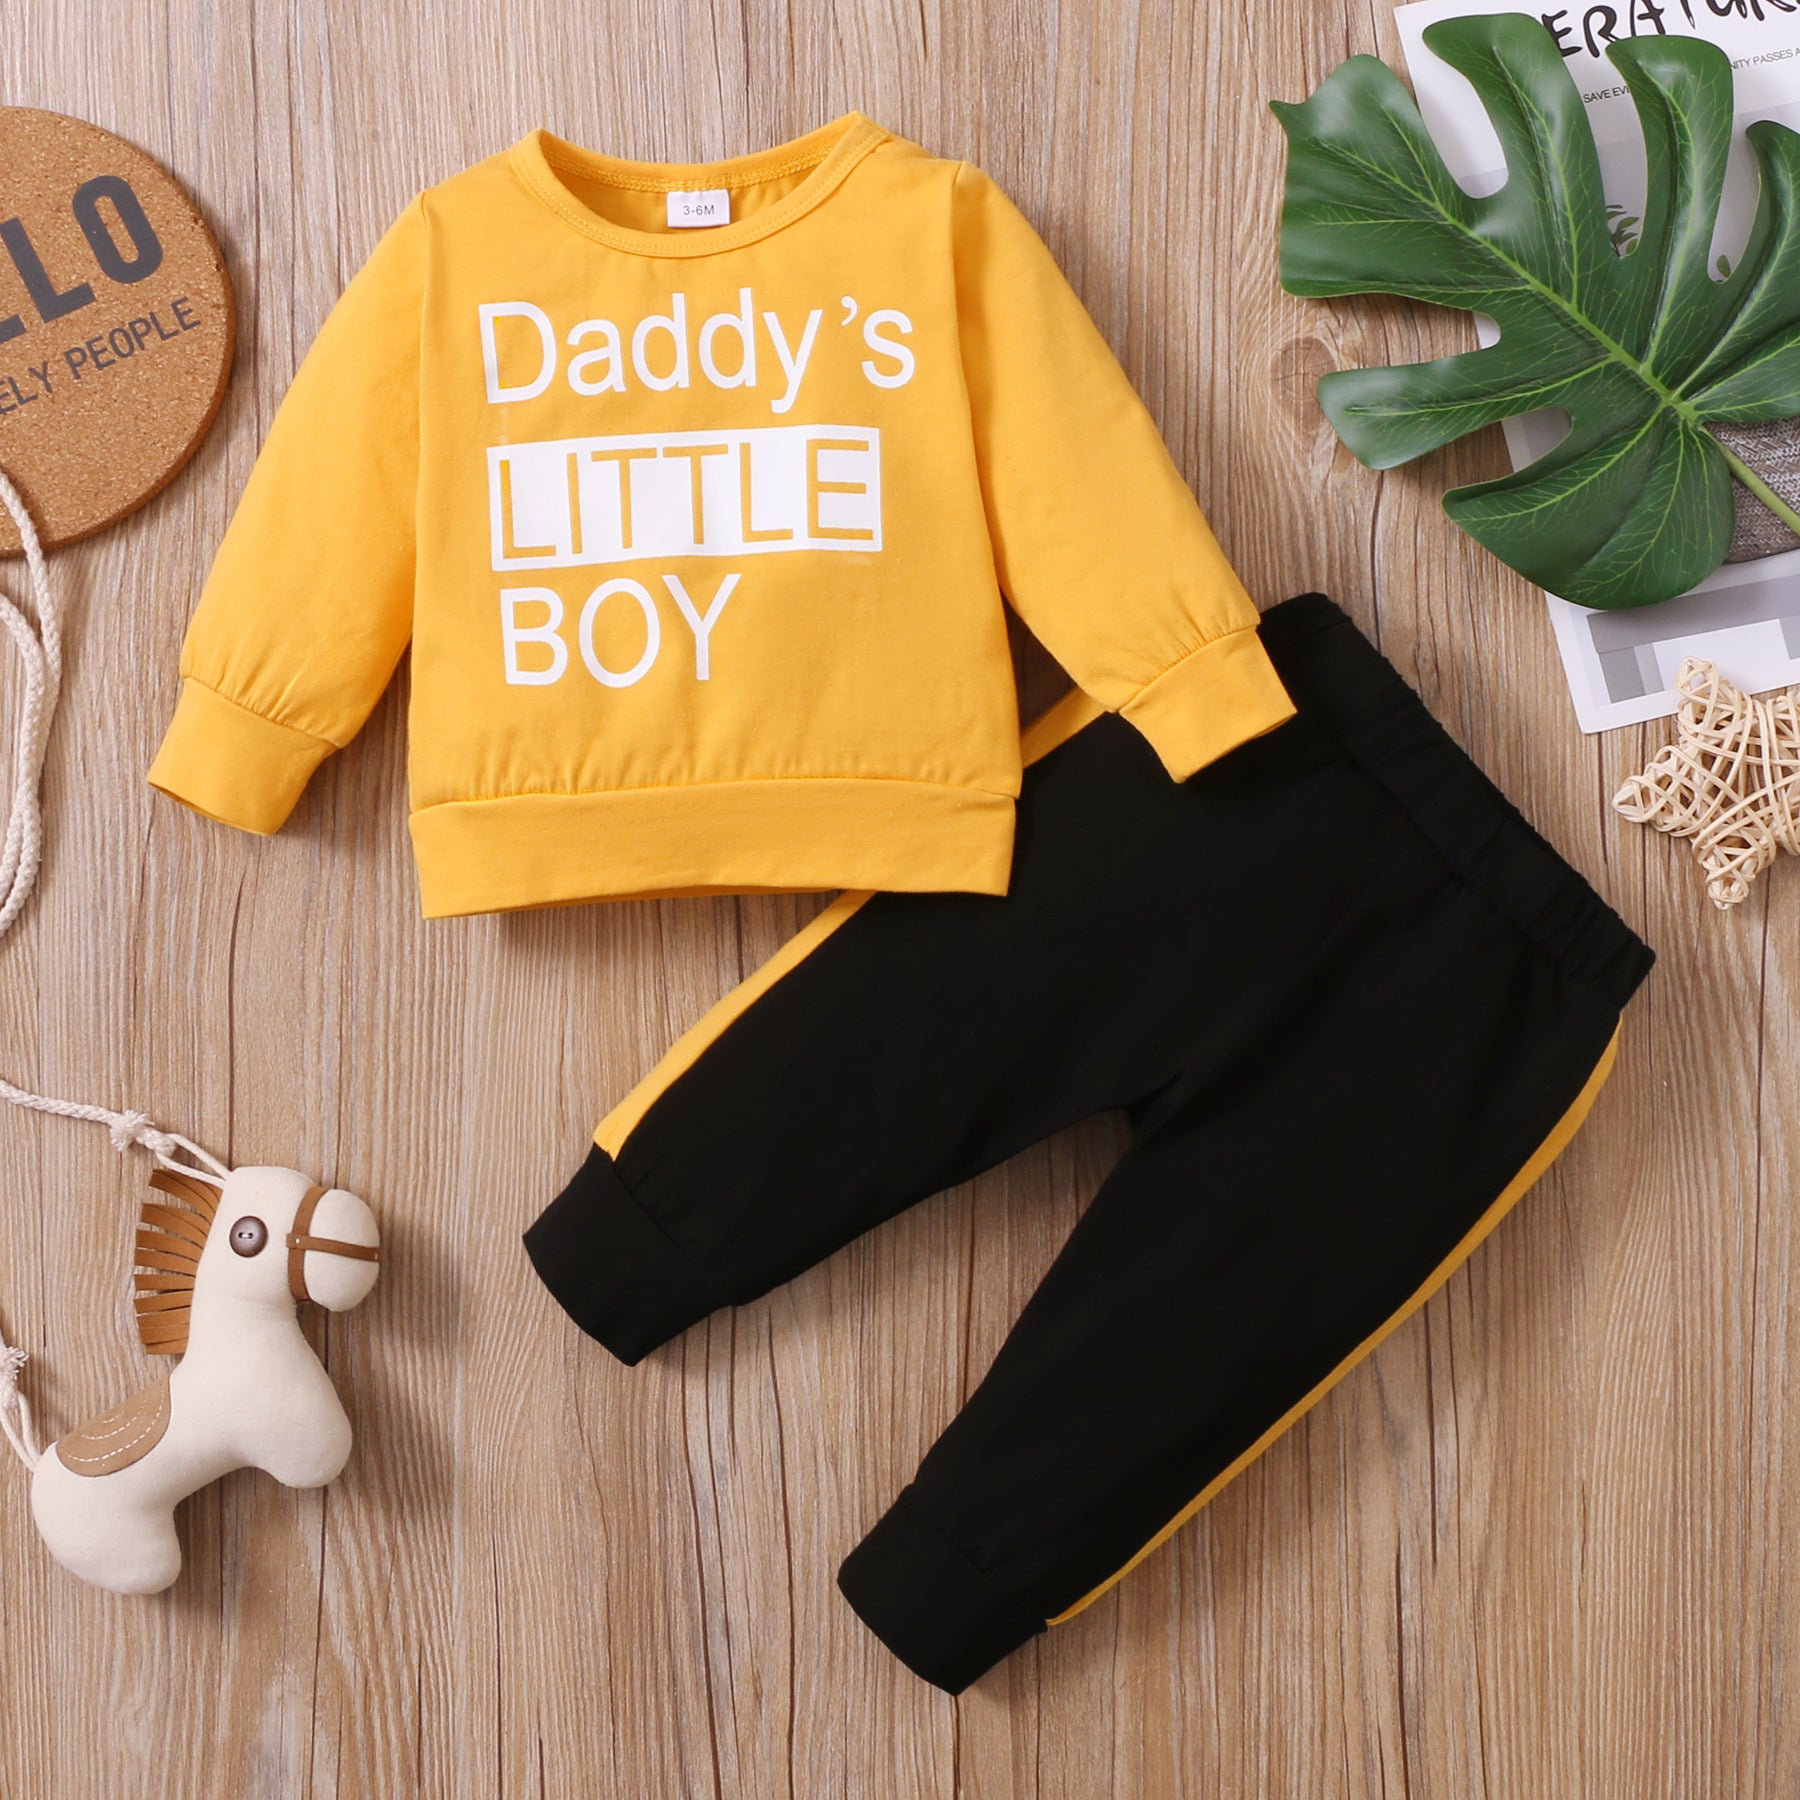 2pcs Baby Letter Print Long-sleeve Cotton Pullover and Pants Set